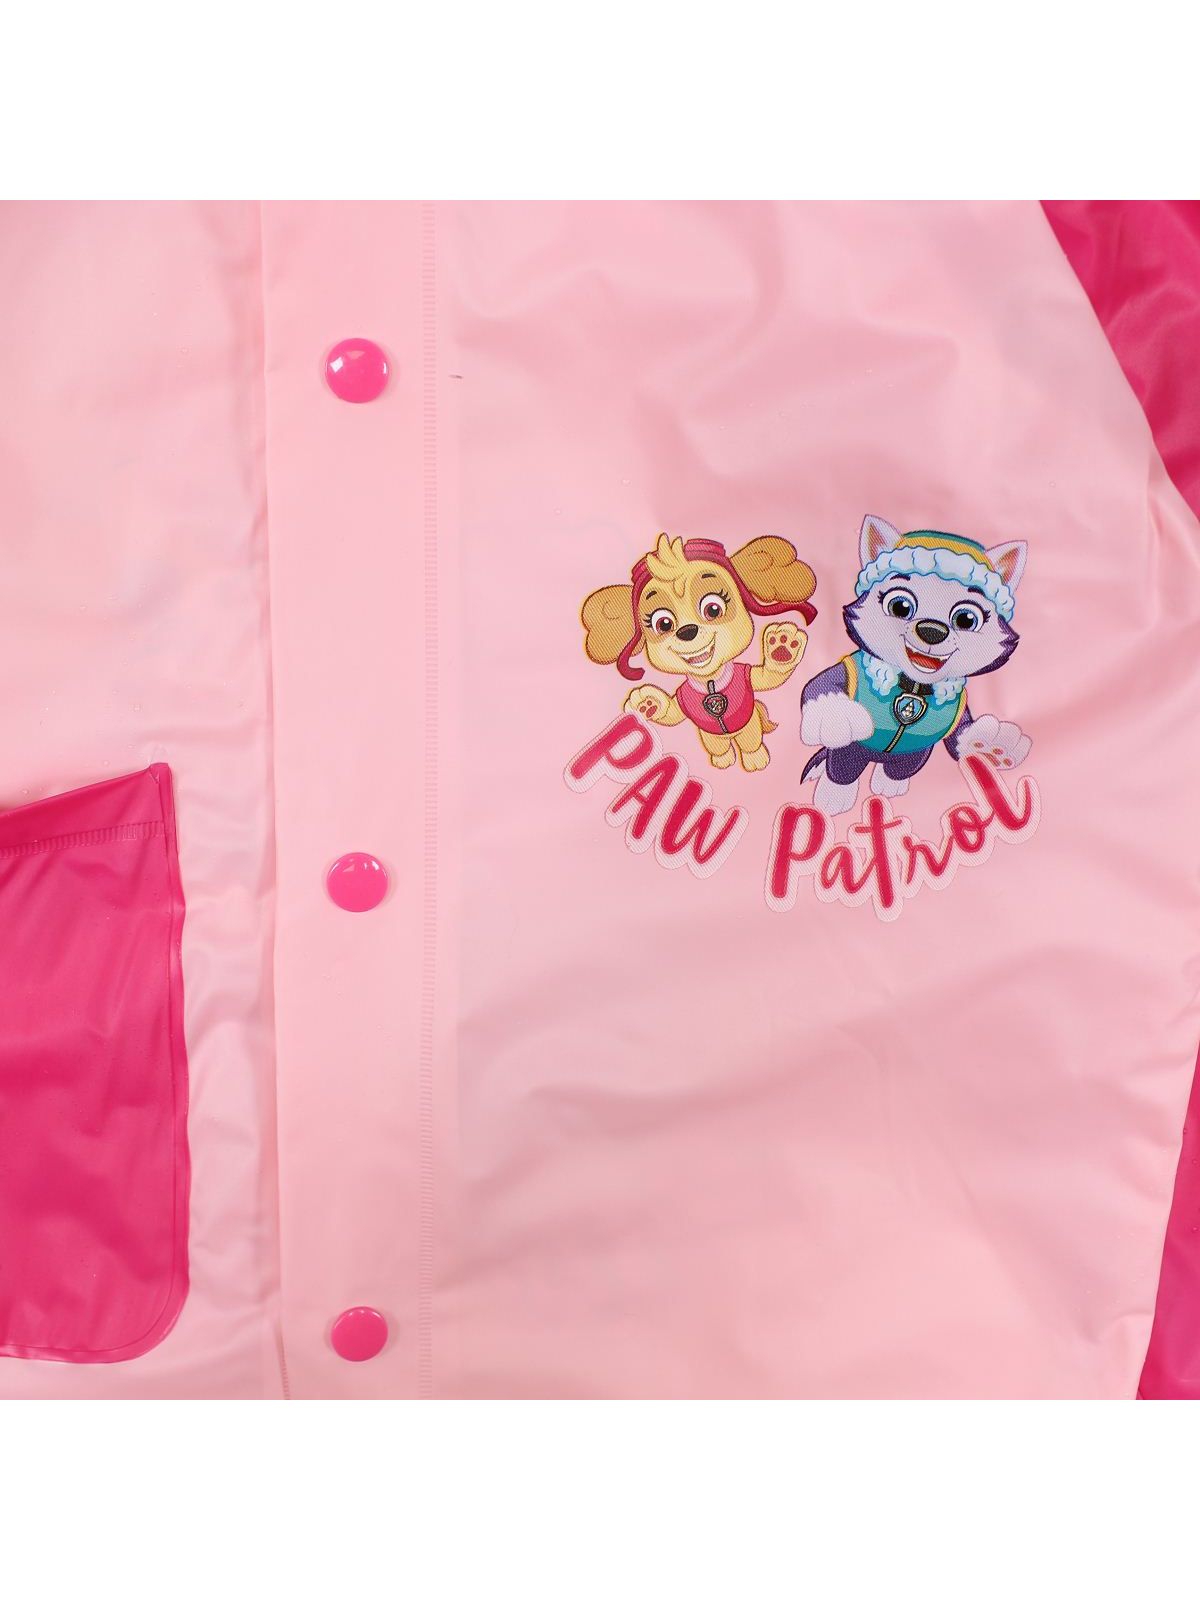 Impermeable Paw Patrol